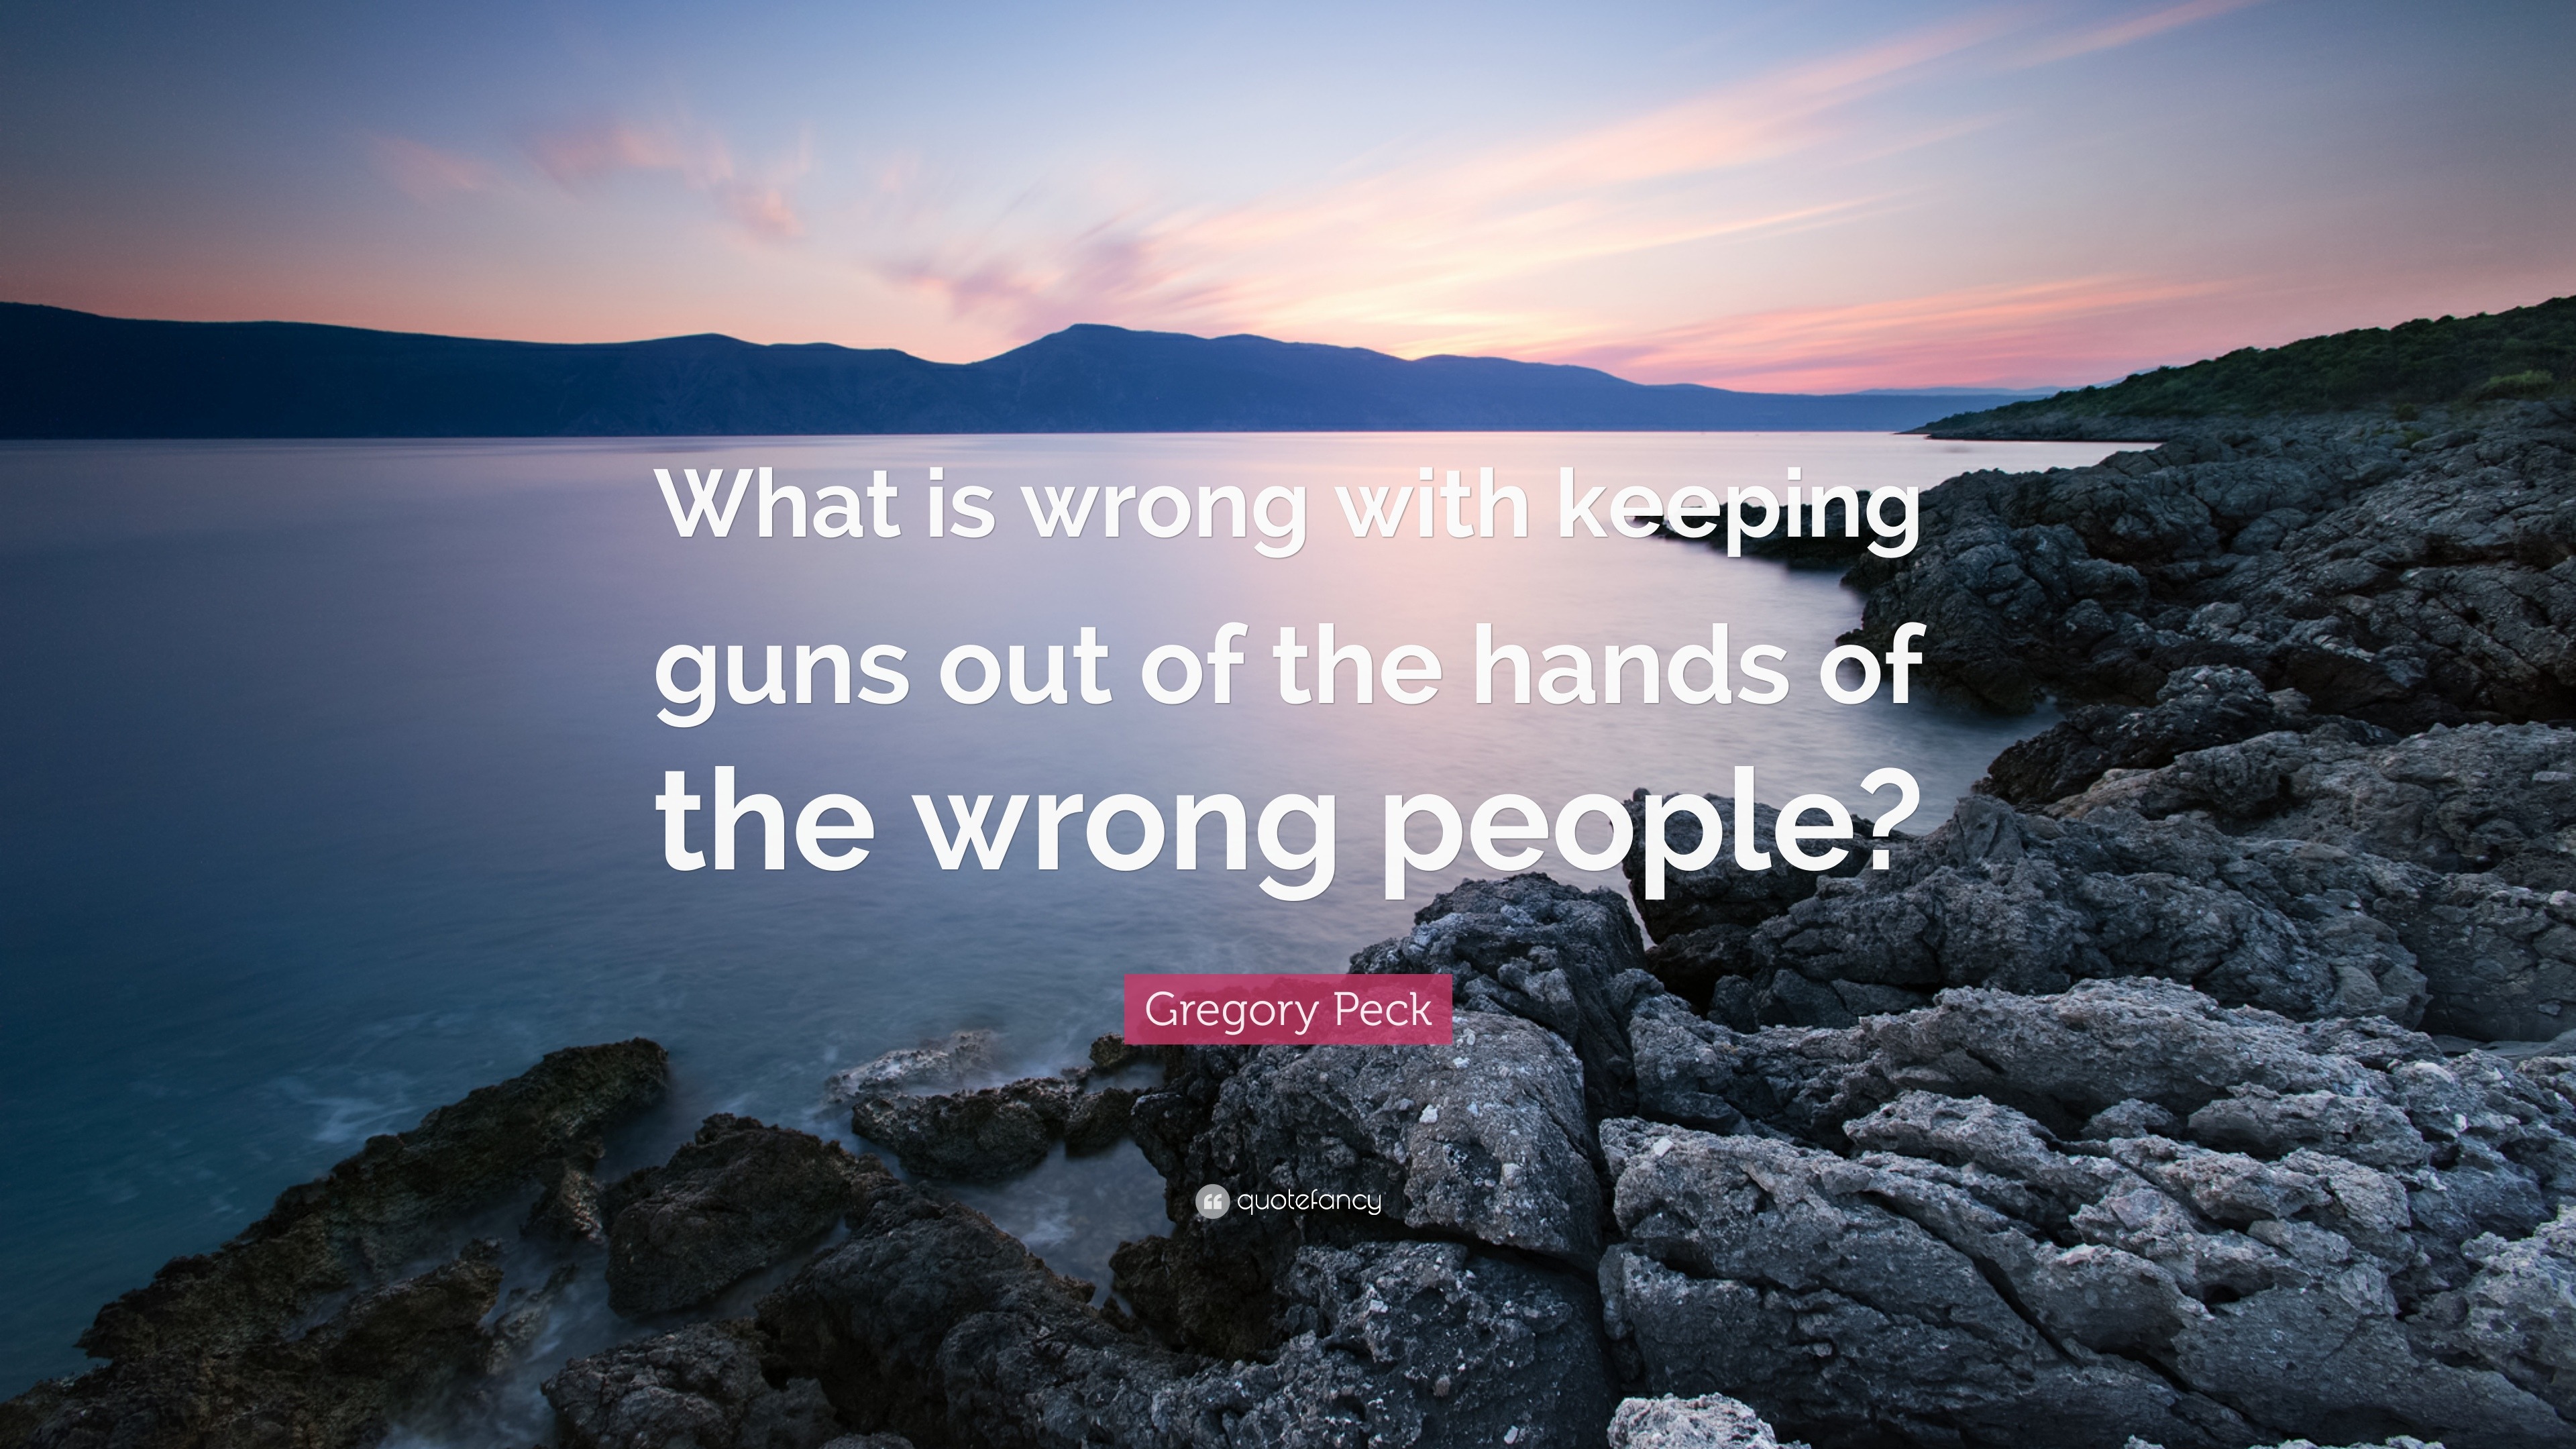 Gregory Peck Quote “what Is Wrong With Keeping Guns Out Of The Hands Of The Wrong People” 0858